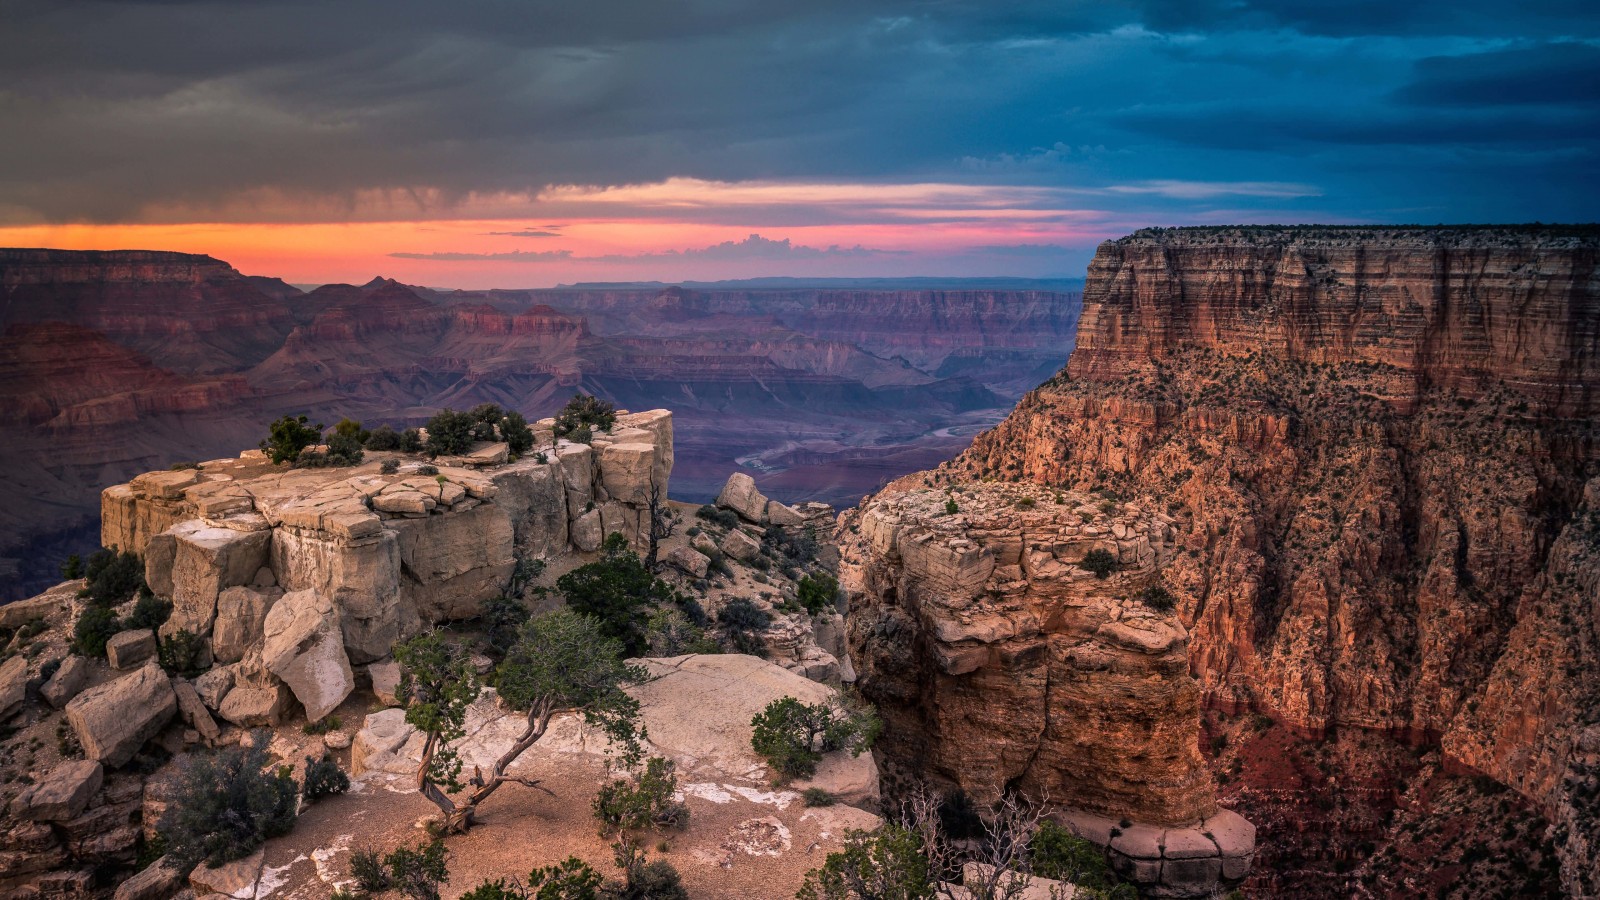 Sunset At The Grand Canyon Wallpaper for Desktop 1600x900